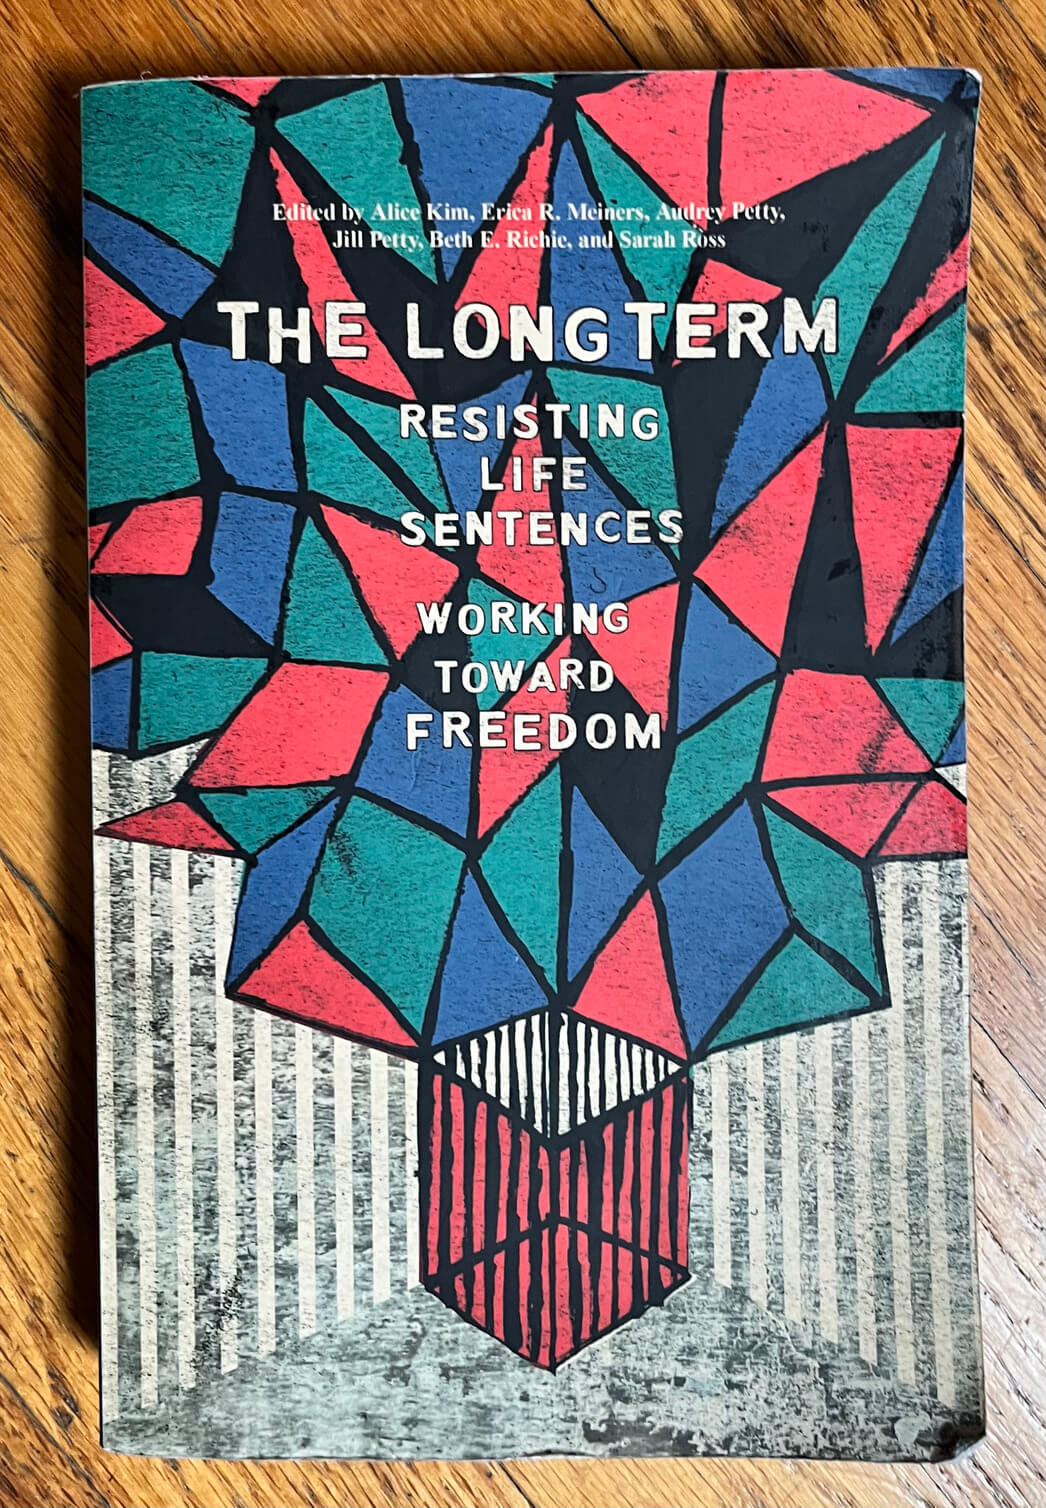 “The Long Term: Resisting Life Sentences, Working Toward Freedom” Edited by Alice Kim, Erica R, Meiners, Andrey Petty, Jill Petty, Beth E. Richie, and Sarah Ross